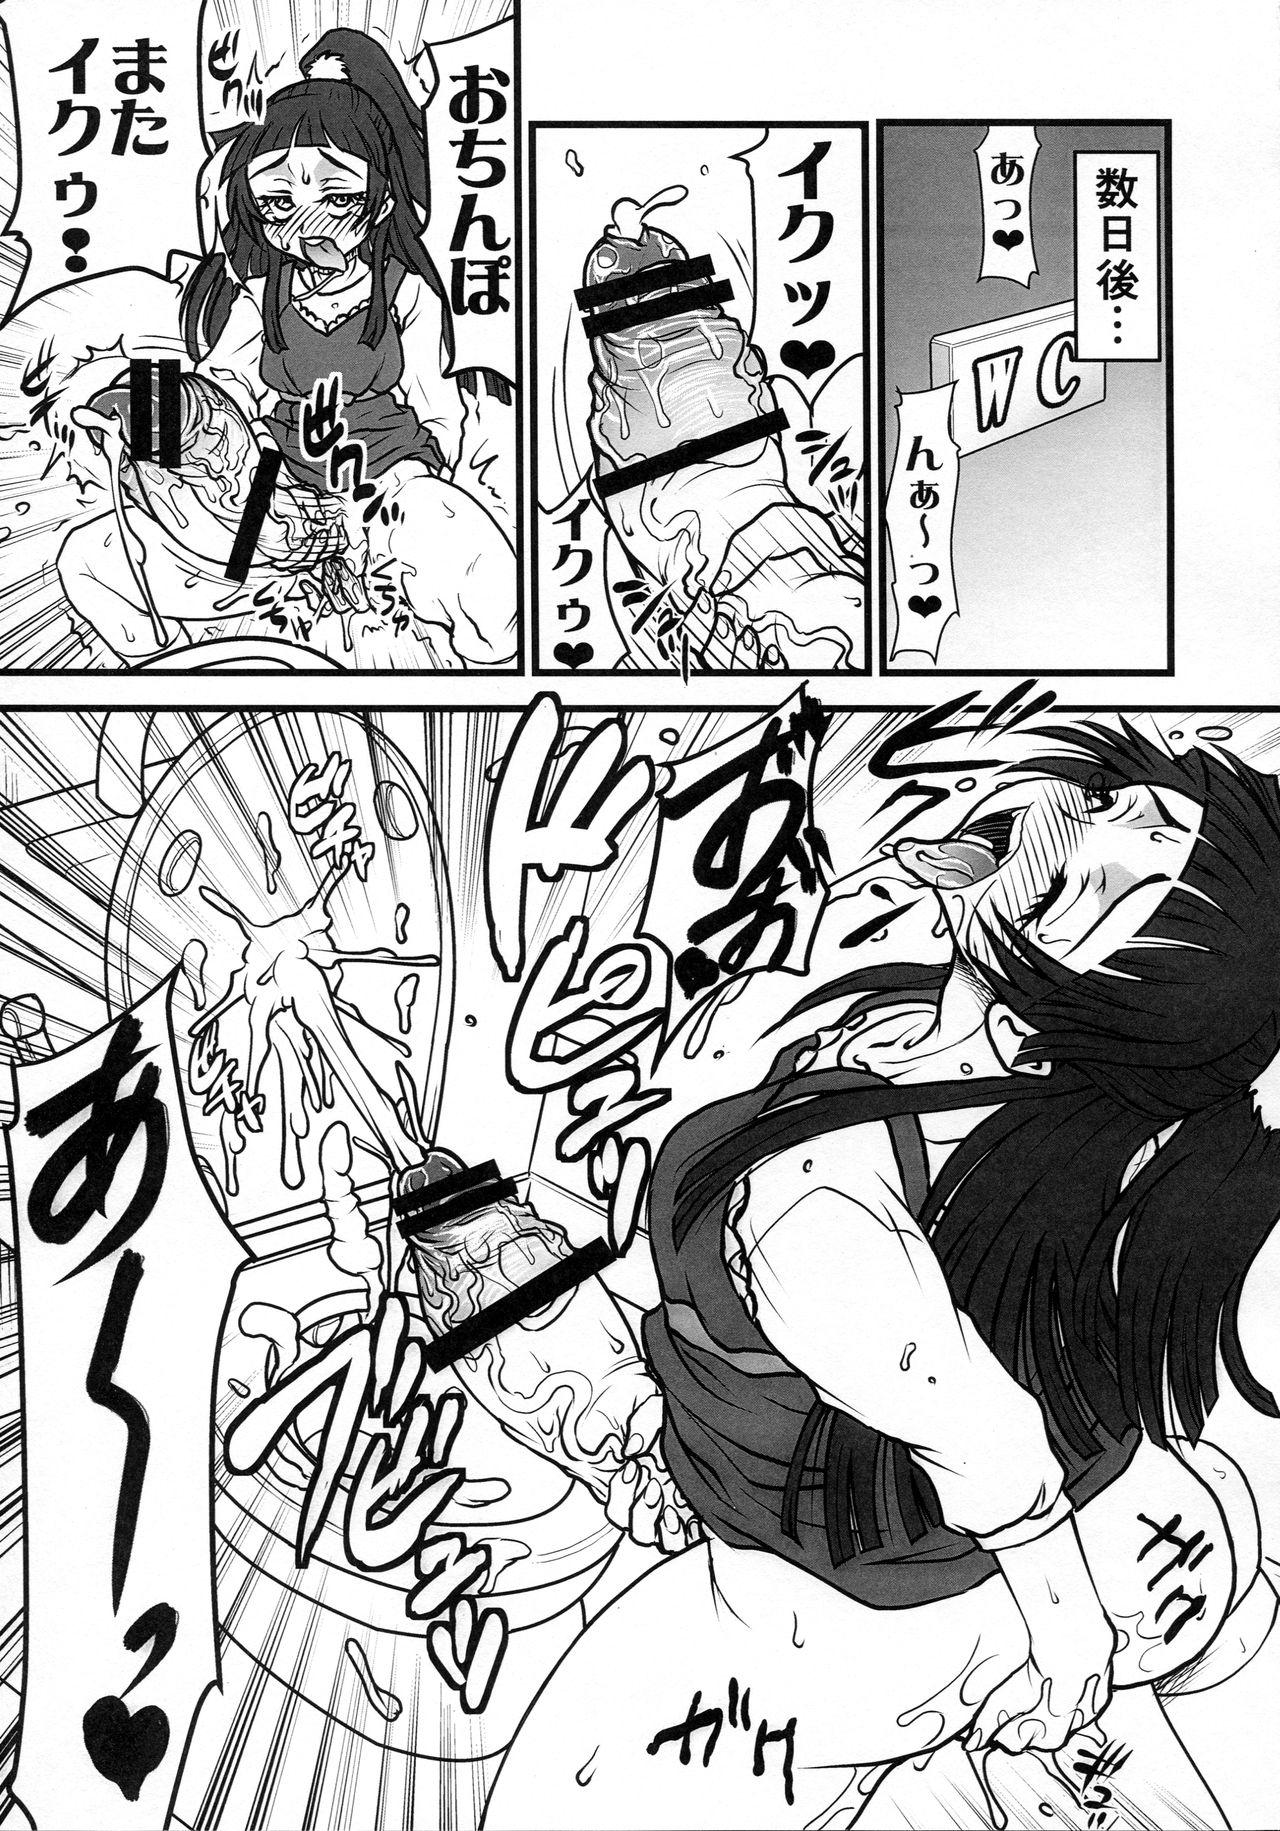 Woman M.A.H.O Girls HARD CORE! - Maho girls precure Nudity - Page 9